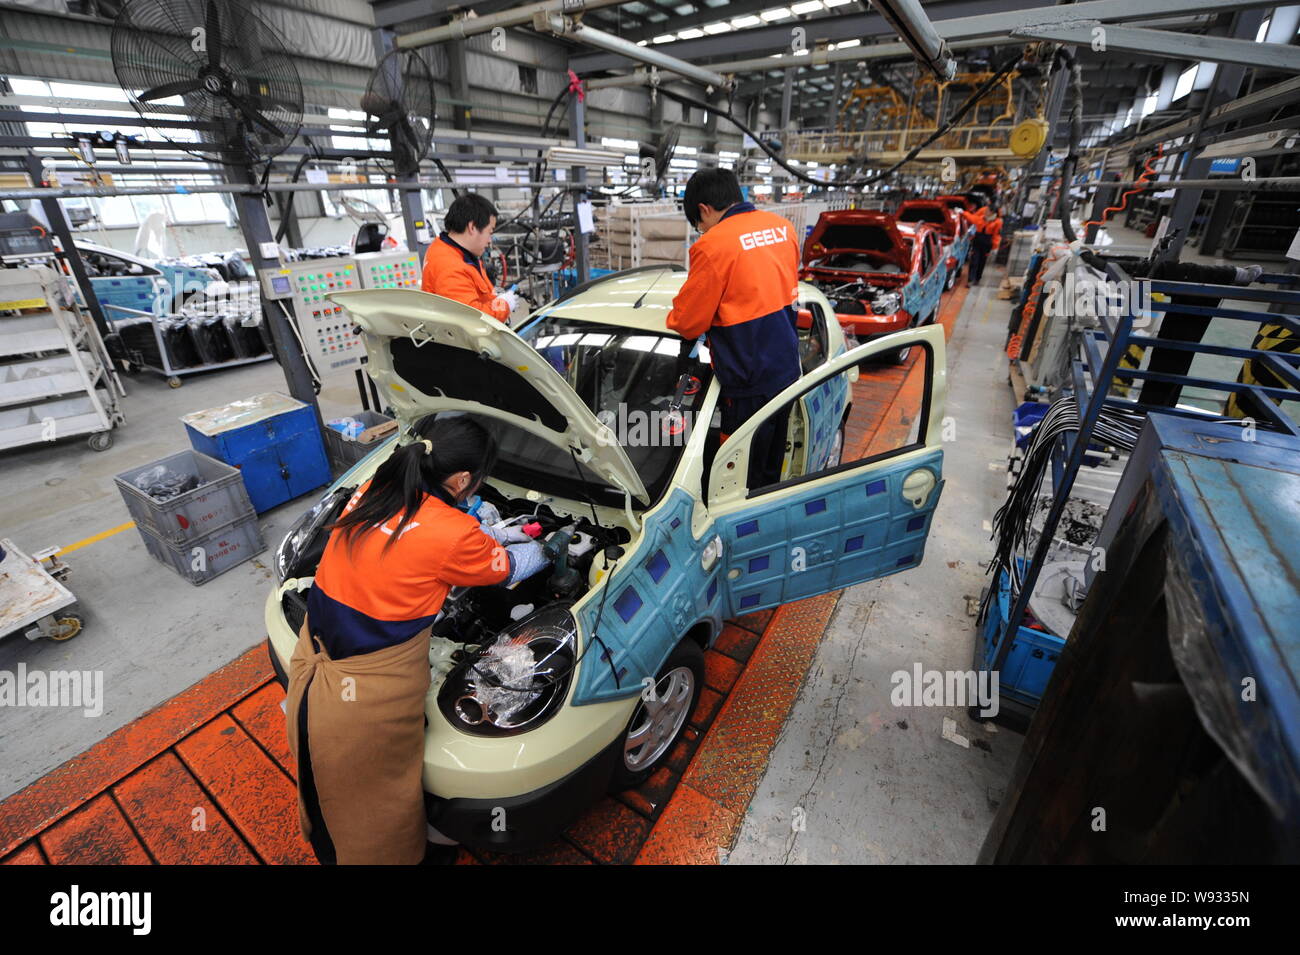 https://c8.alamy.com/comp/W9335N/file-chinese-factory-workers-assemble-panda-gx2-cars-on-the-assembly-line-at-an-auto-plant-of-geely-in-linhai-city-east-chinas-zhejiang-province-W9335N.jpg